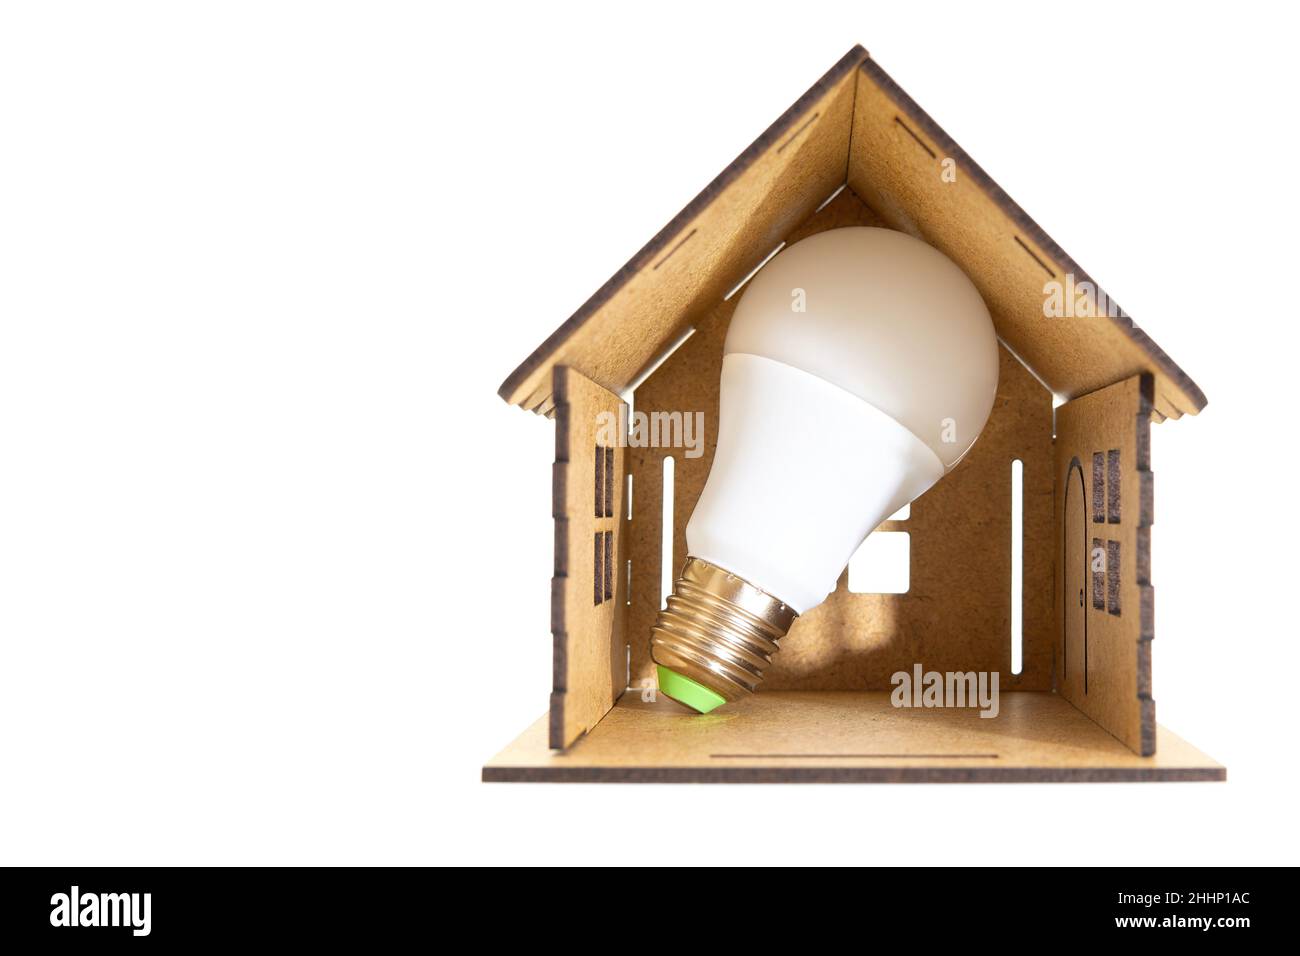 Energy efficient light bulb inside a miniature wooden house model isolated on white. Cutting down bills with led lamps. Stock Photo